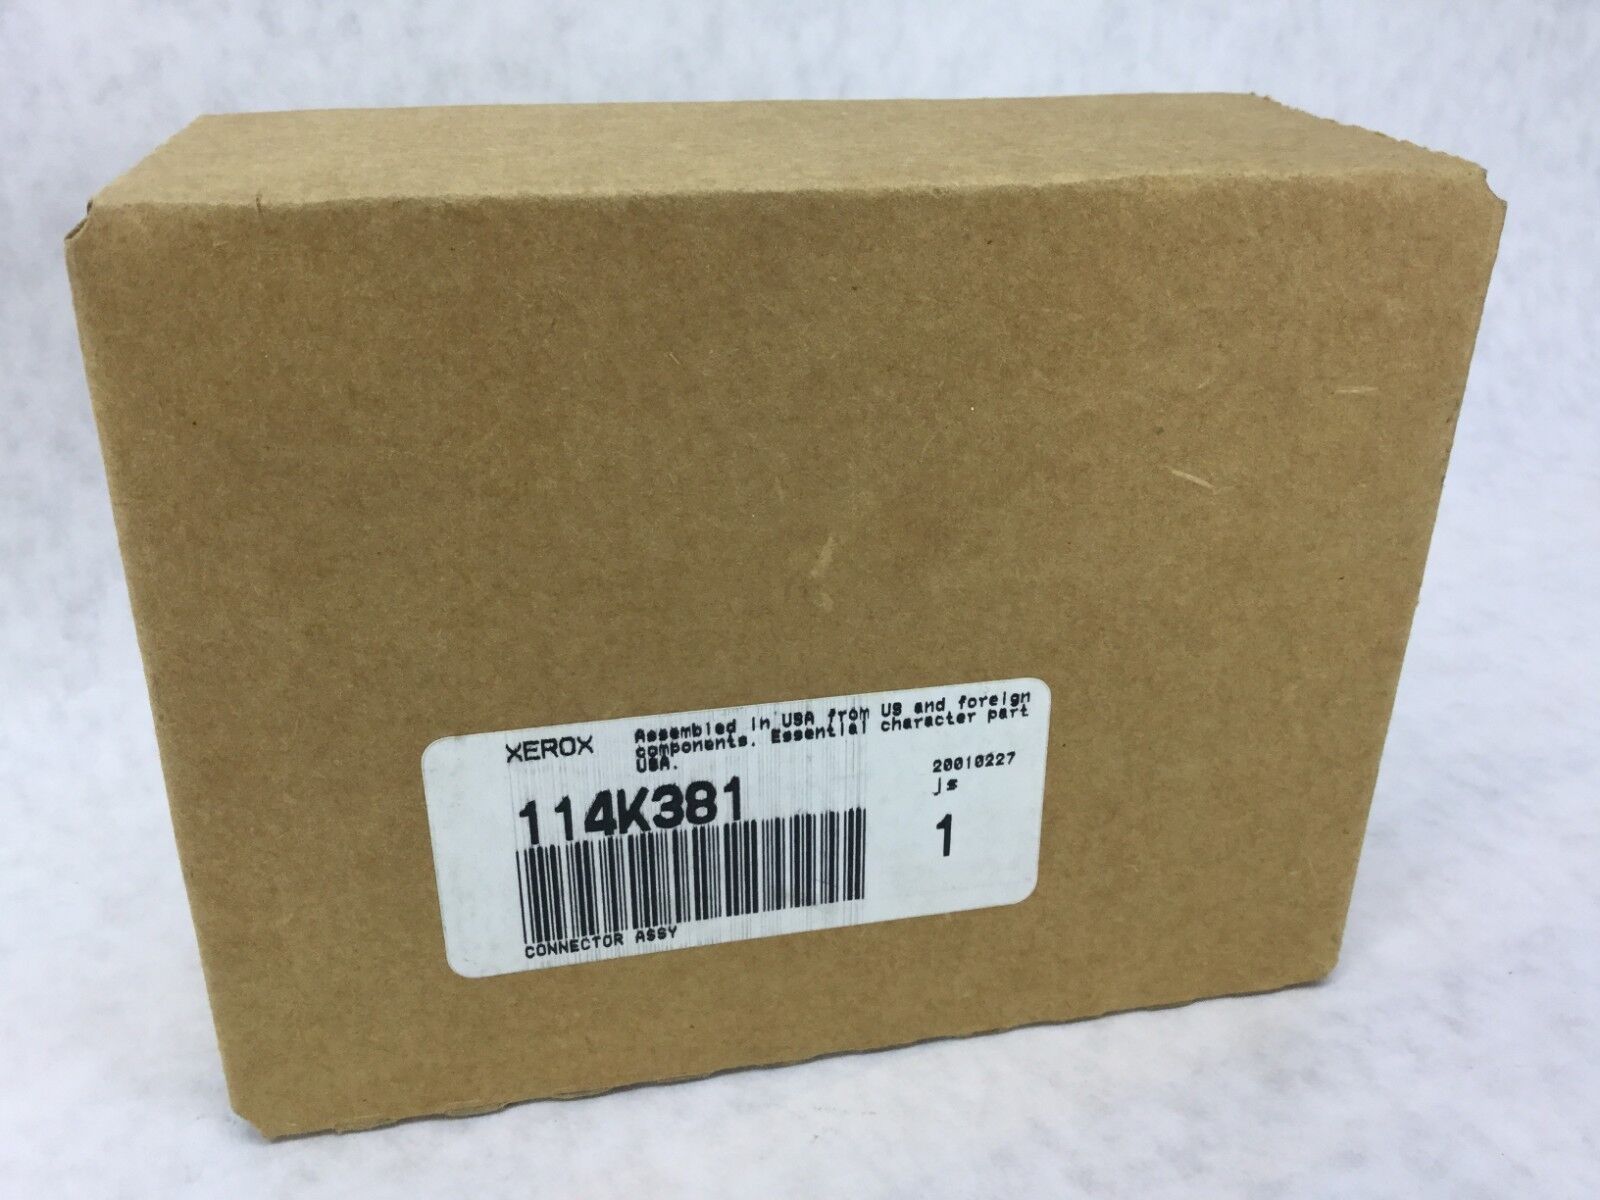 Genuine XEROX 114K381 Connector Assembly NEW in Sealed Box